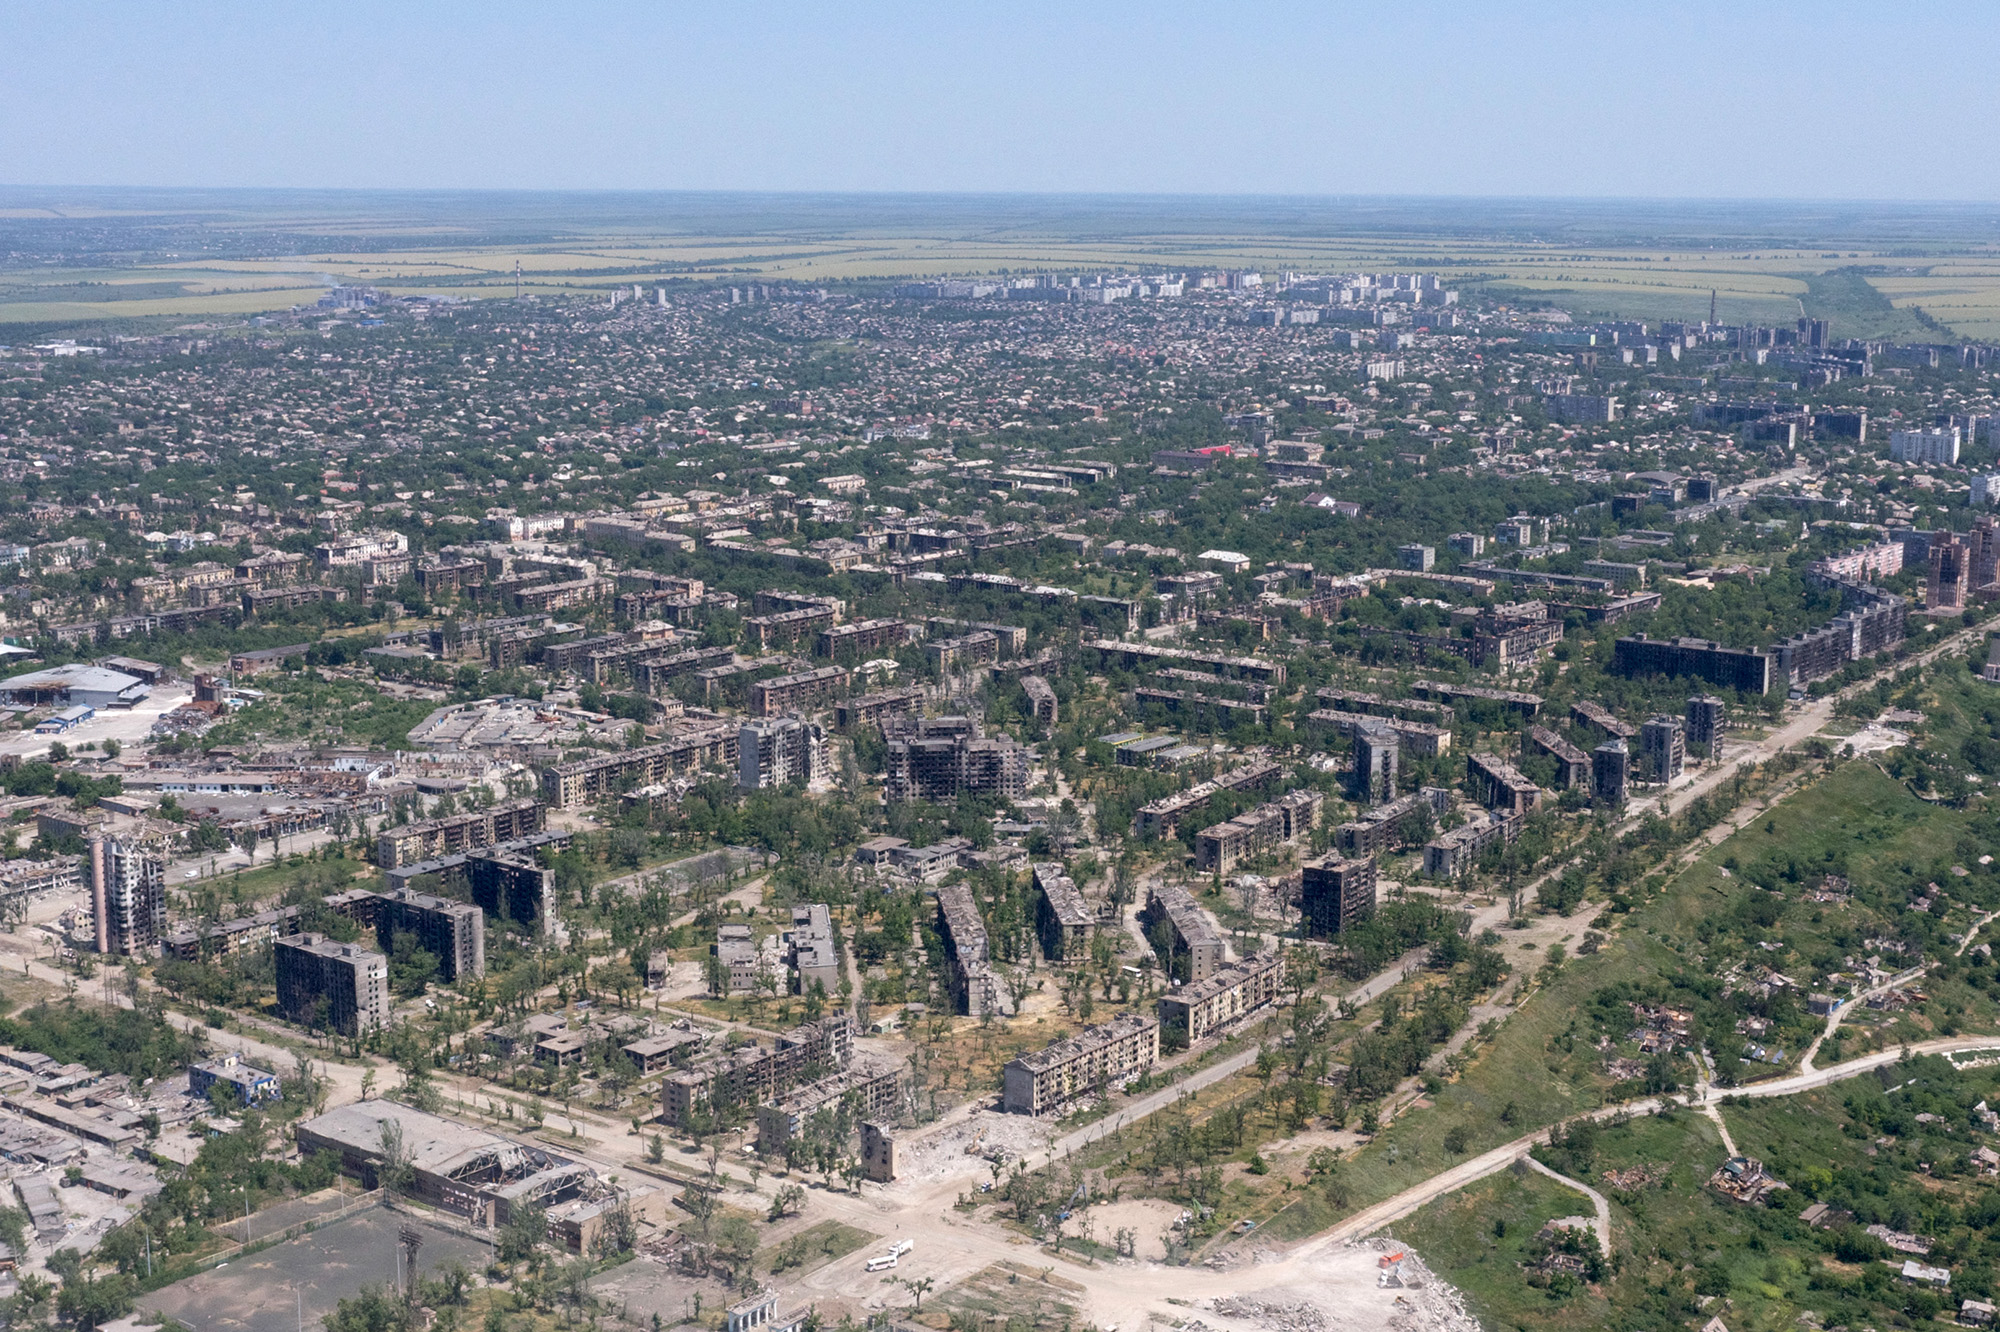 An aerial view of the destroyed city of Mariupol, Ukraine, on June 13, 